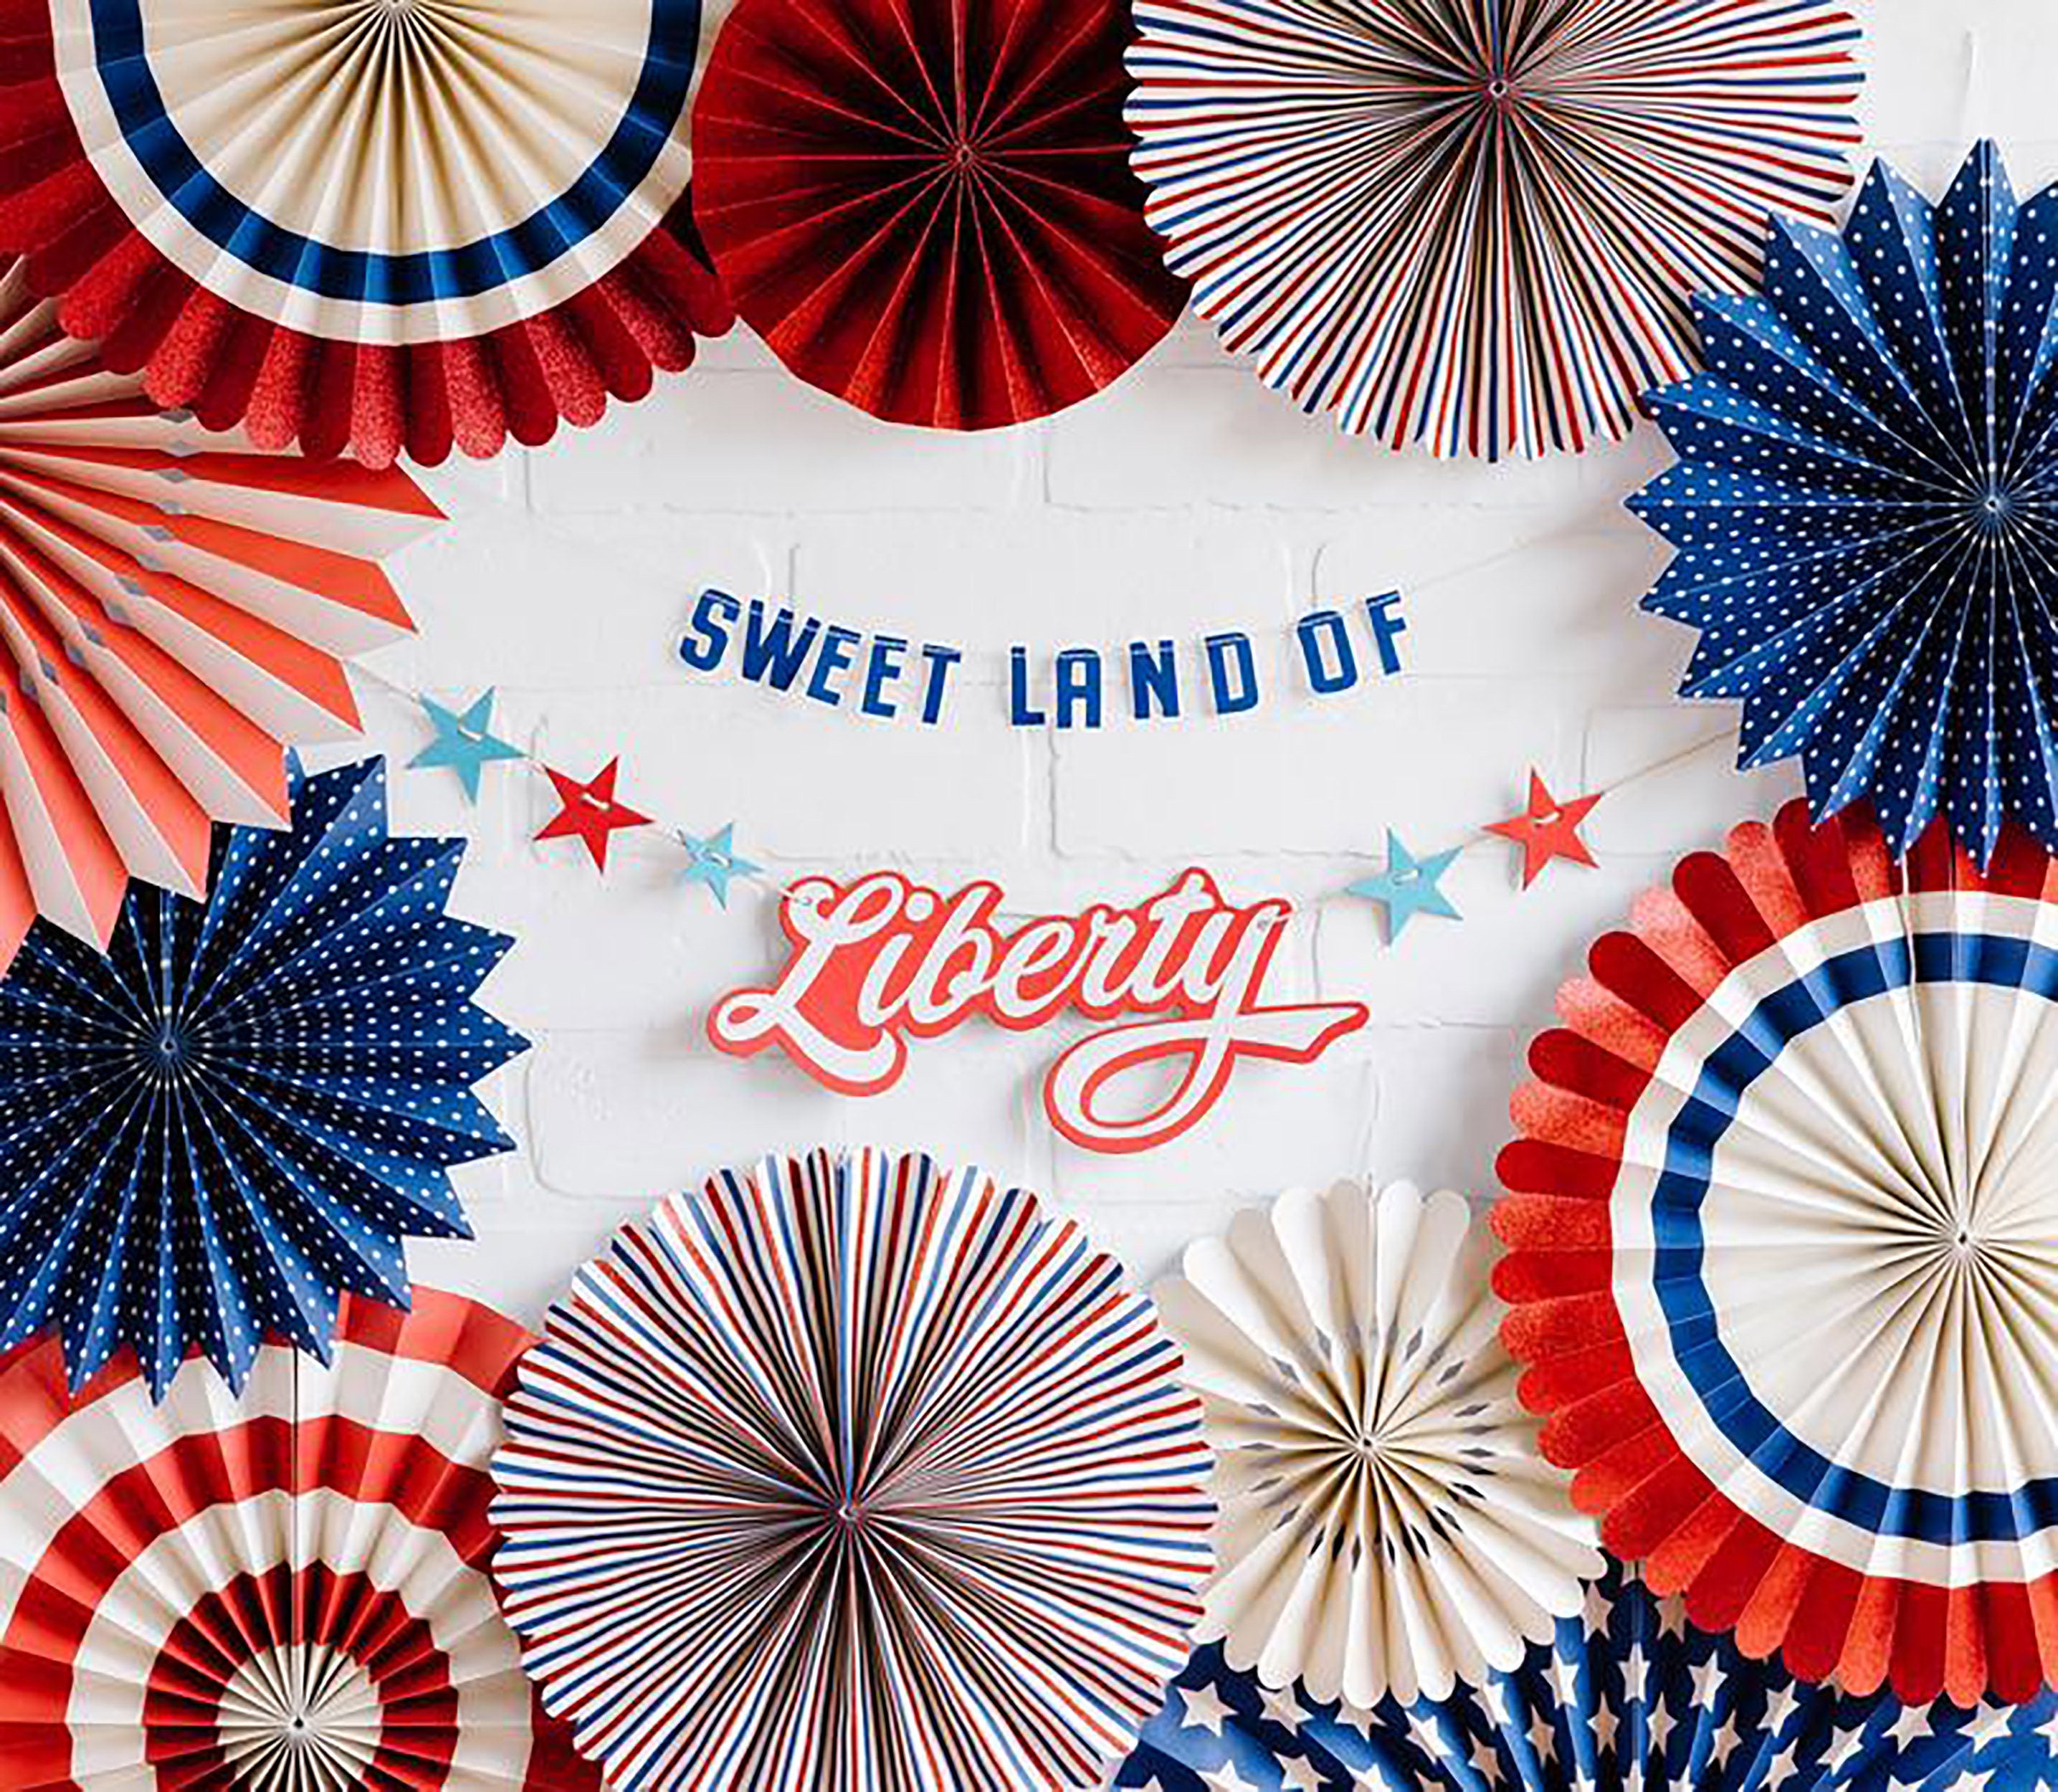 4th of July Banner | 4th of July Decorations - Memorial Day Banner - 4th of July Party Supplies - Patriotic Party - Sweet Land of Liberty